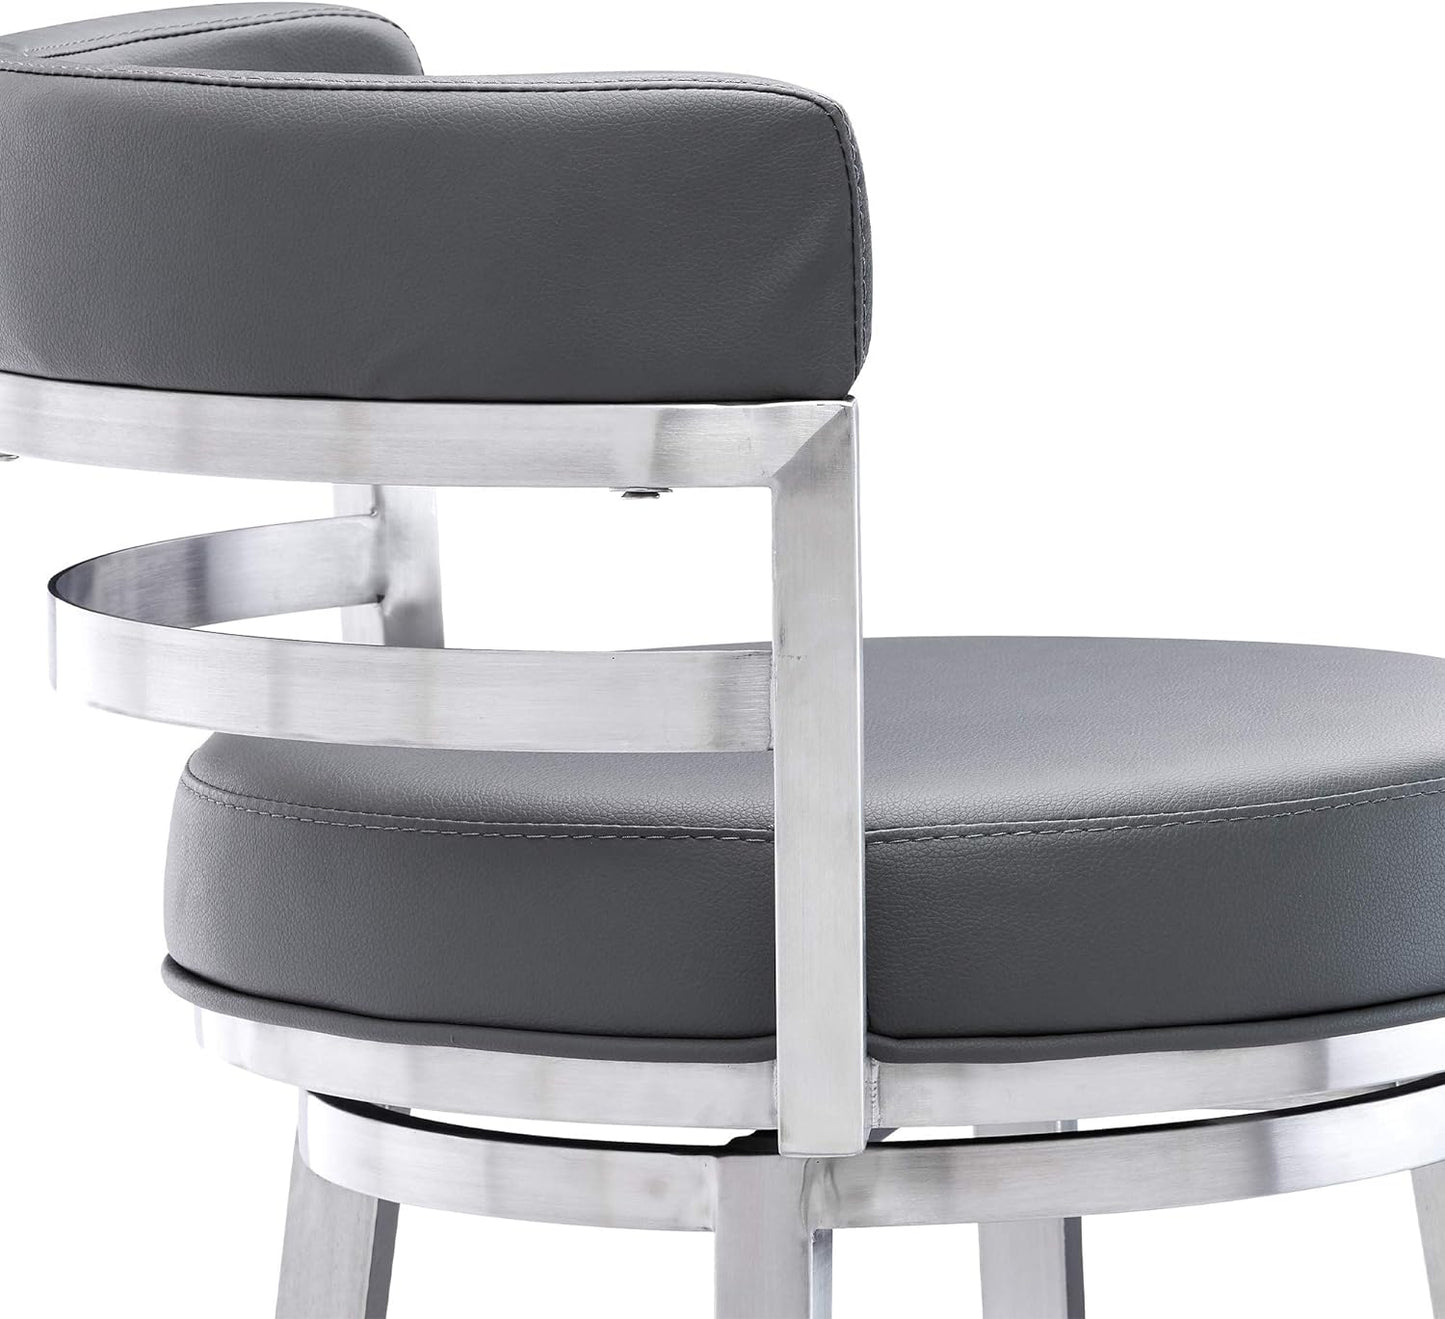 Armen Living Madrid Brushed Stainless Steel Faux Leather Barstool- White or Gray